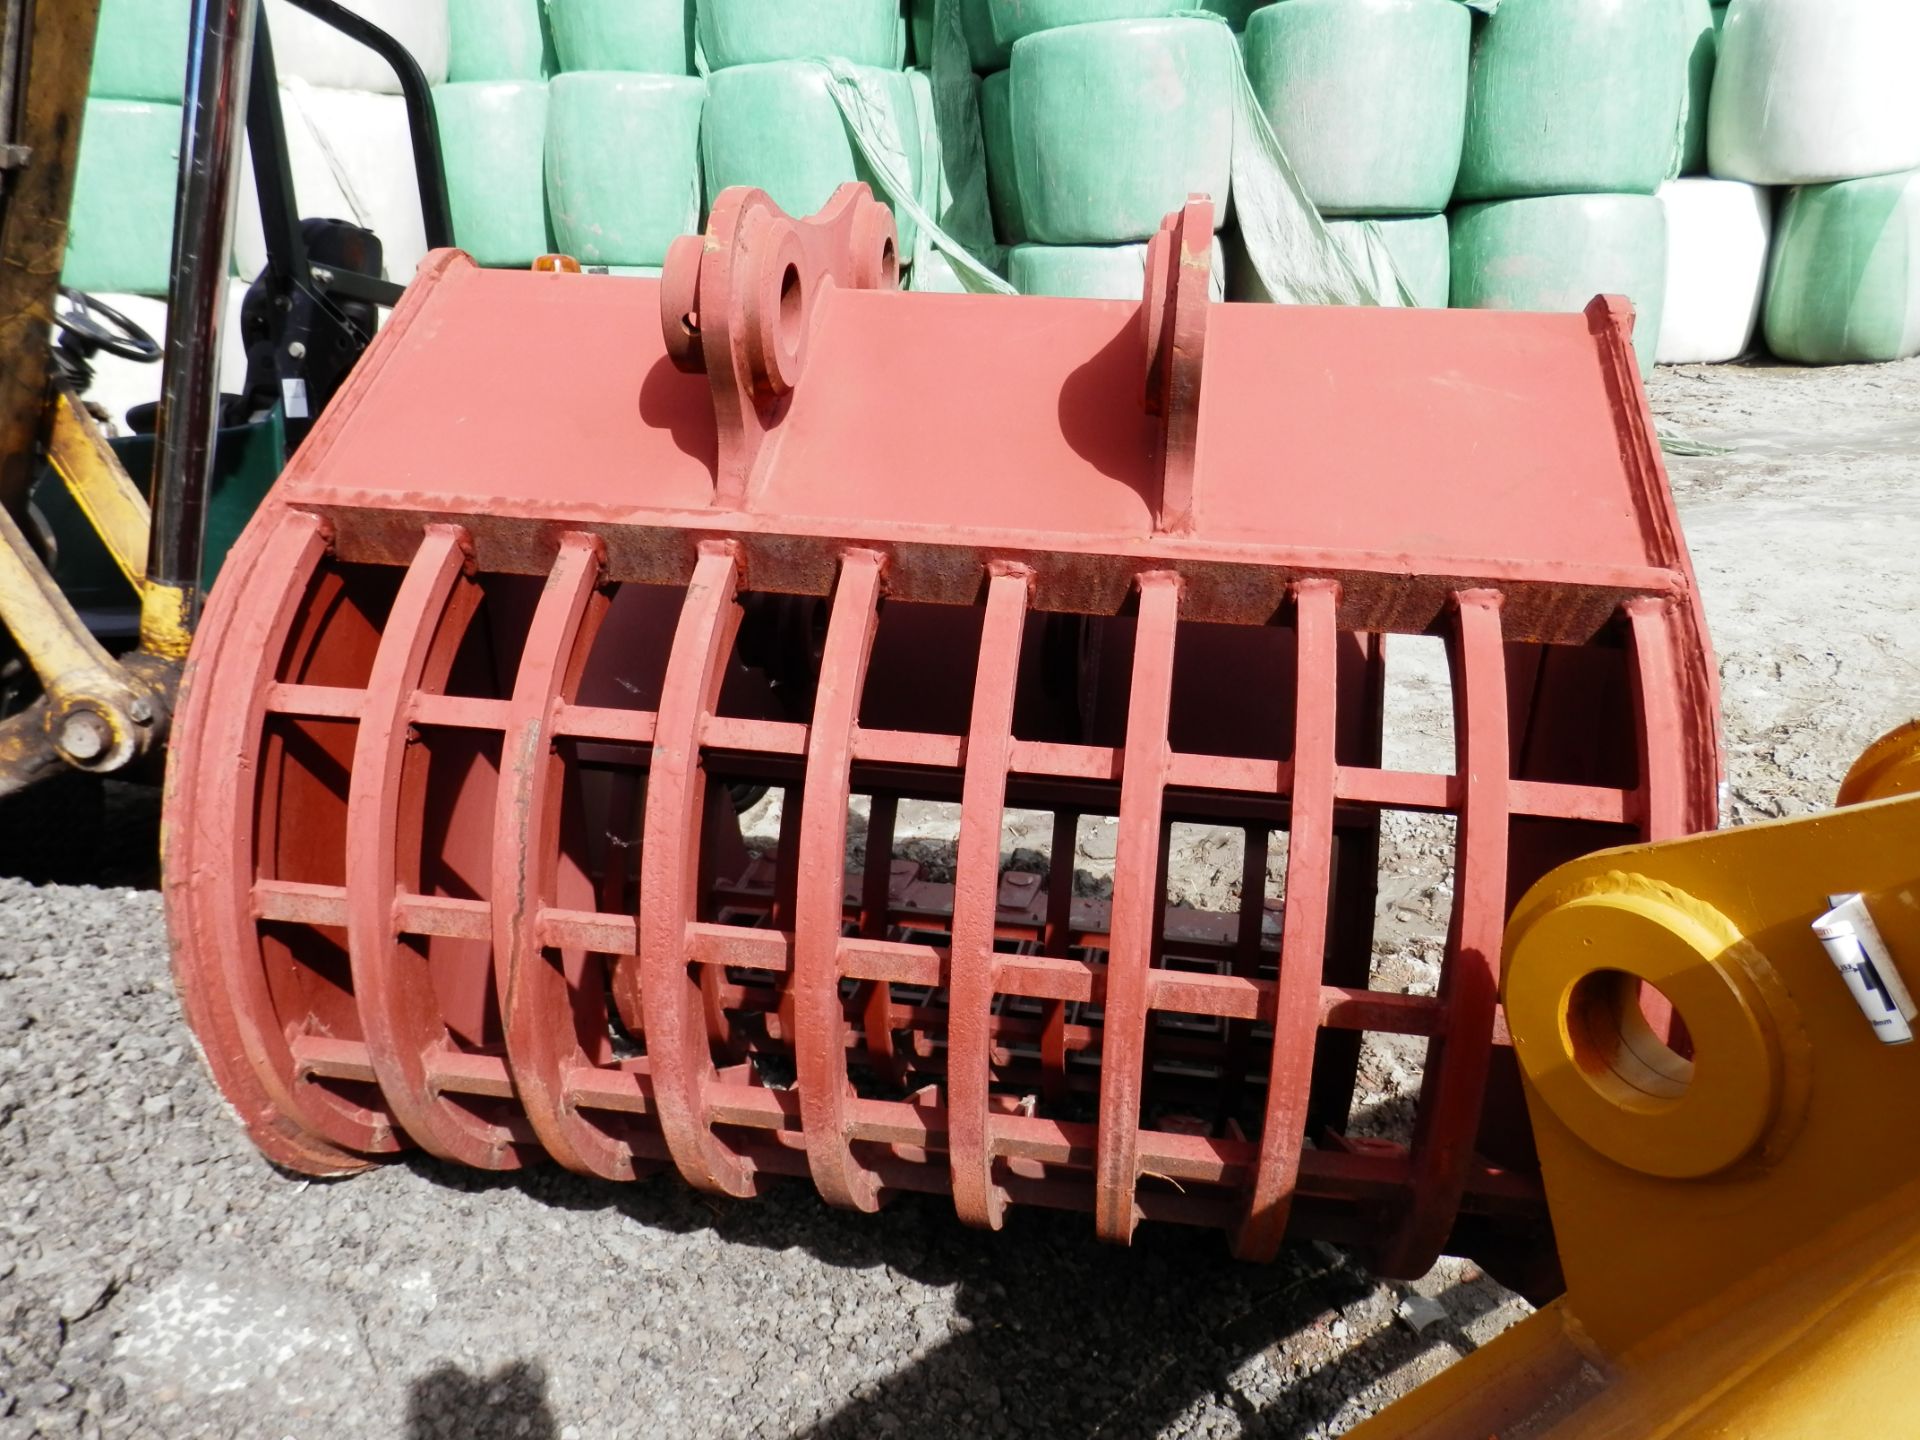 DS - 1 X RIDDLE BUCKET TO FIT KOMATSU DIGGER. NEW & UNUSED.   LISTING IS FOR 1 X RIDDLE BUCKET AS - Image 2 of 3